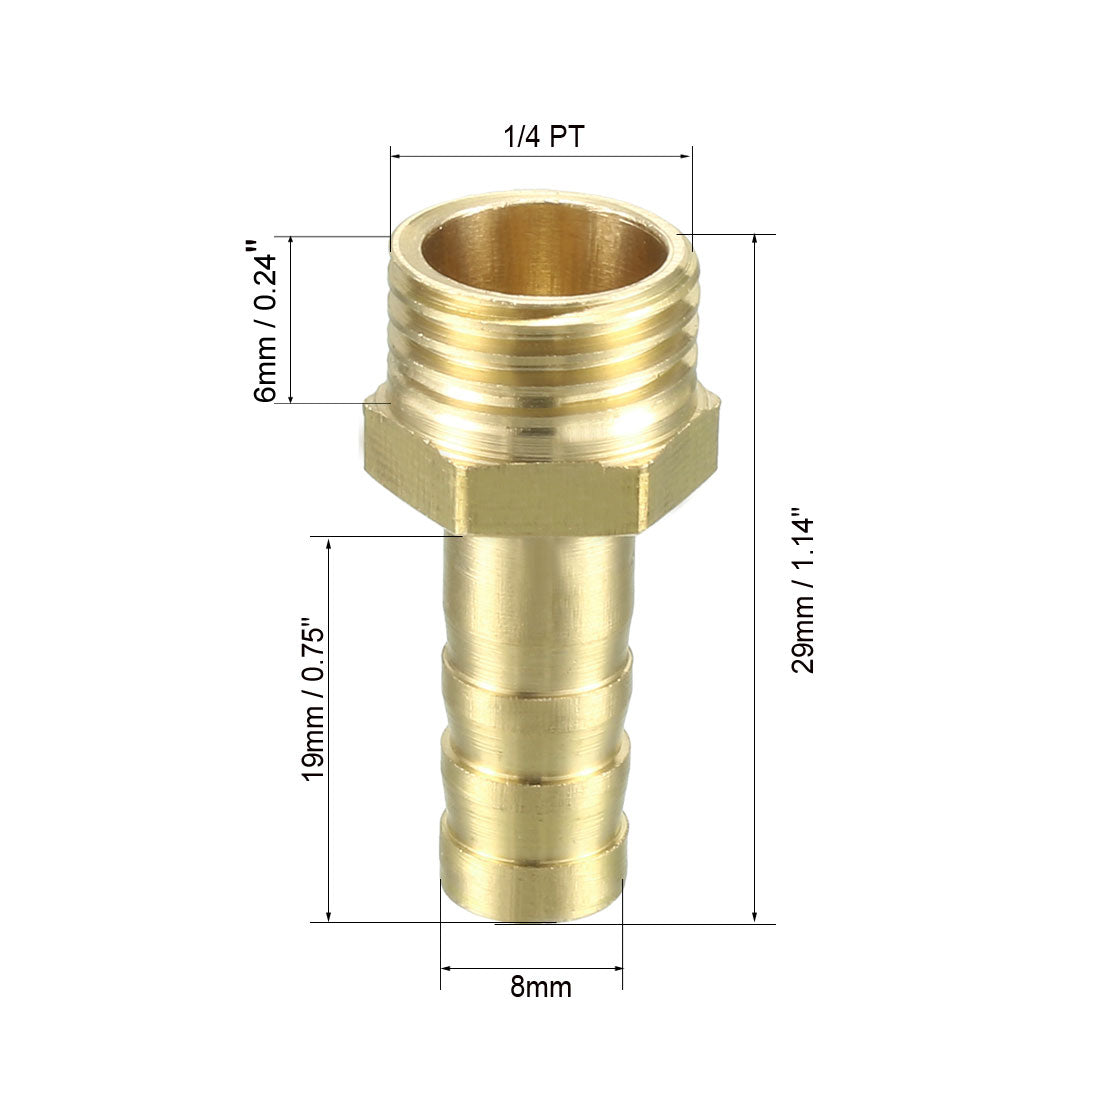 uxcell Uxcell Brass Barb Hose Fitting Connector Adapter 8mm Barbed x G1/4 Male Pipe